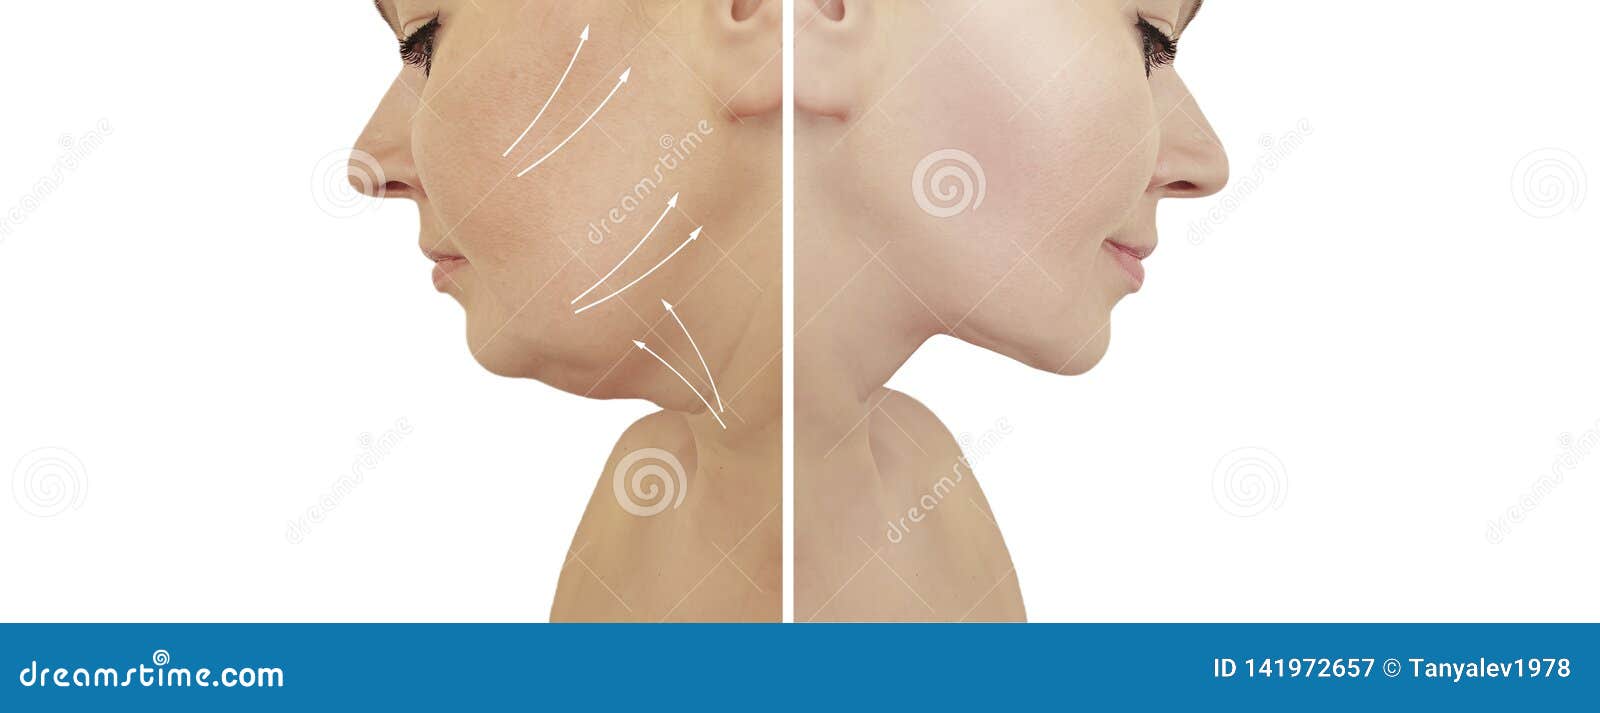 beautiful woman double chin lift before and after correction liposuction procedures